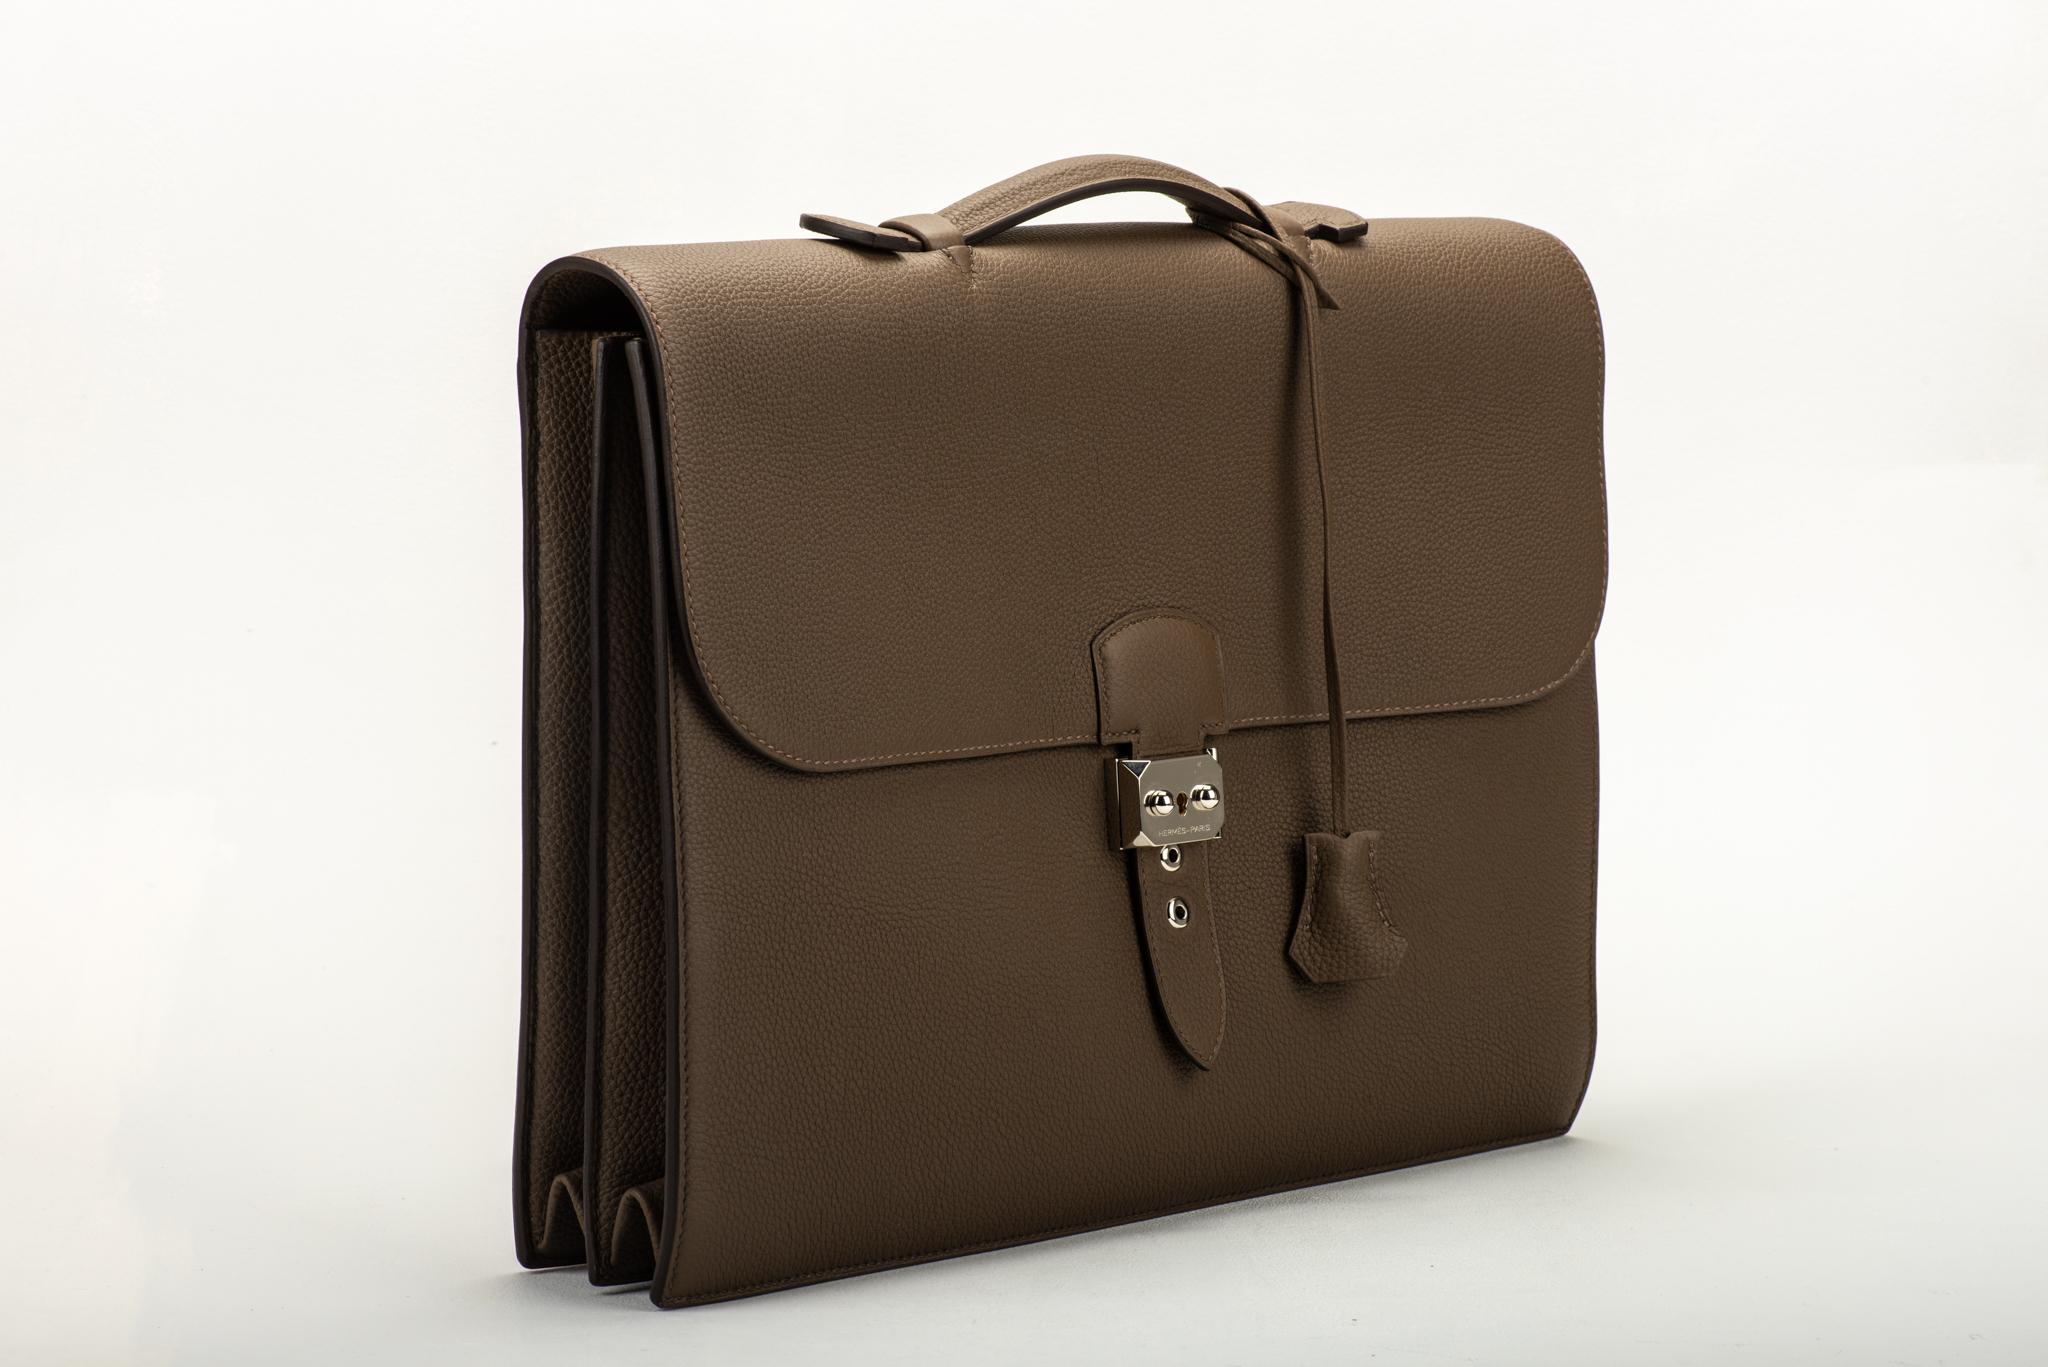 Hermes new condition etain togo leather briefcase, sac a depeche 38cm, with palladium hardware. Date stamp R for 2014. Comes with 2 keys and original dust cover.